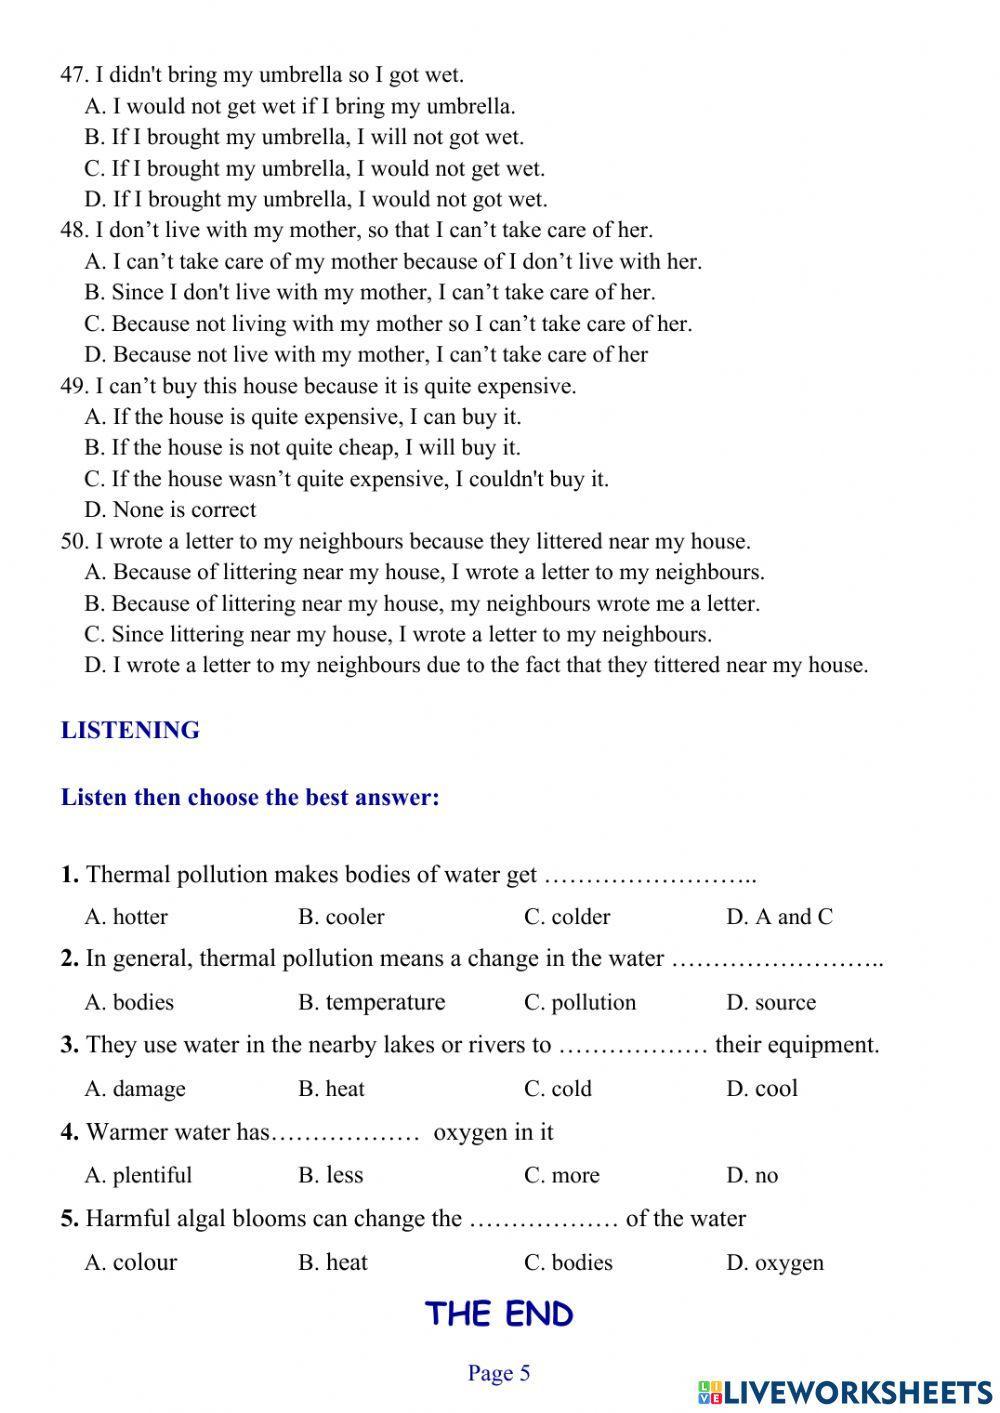 Tieng Anh Lop 8 - 2nd Mid-Term Test 01